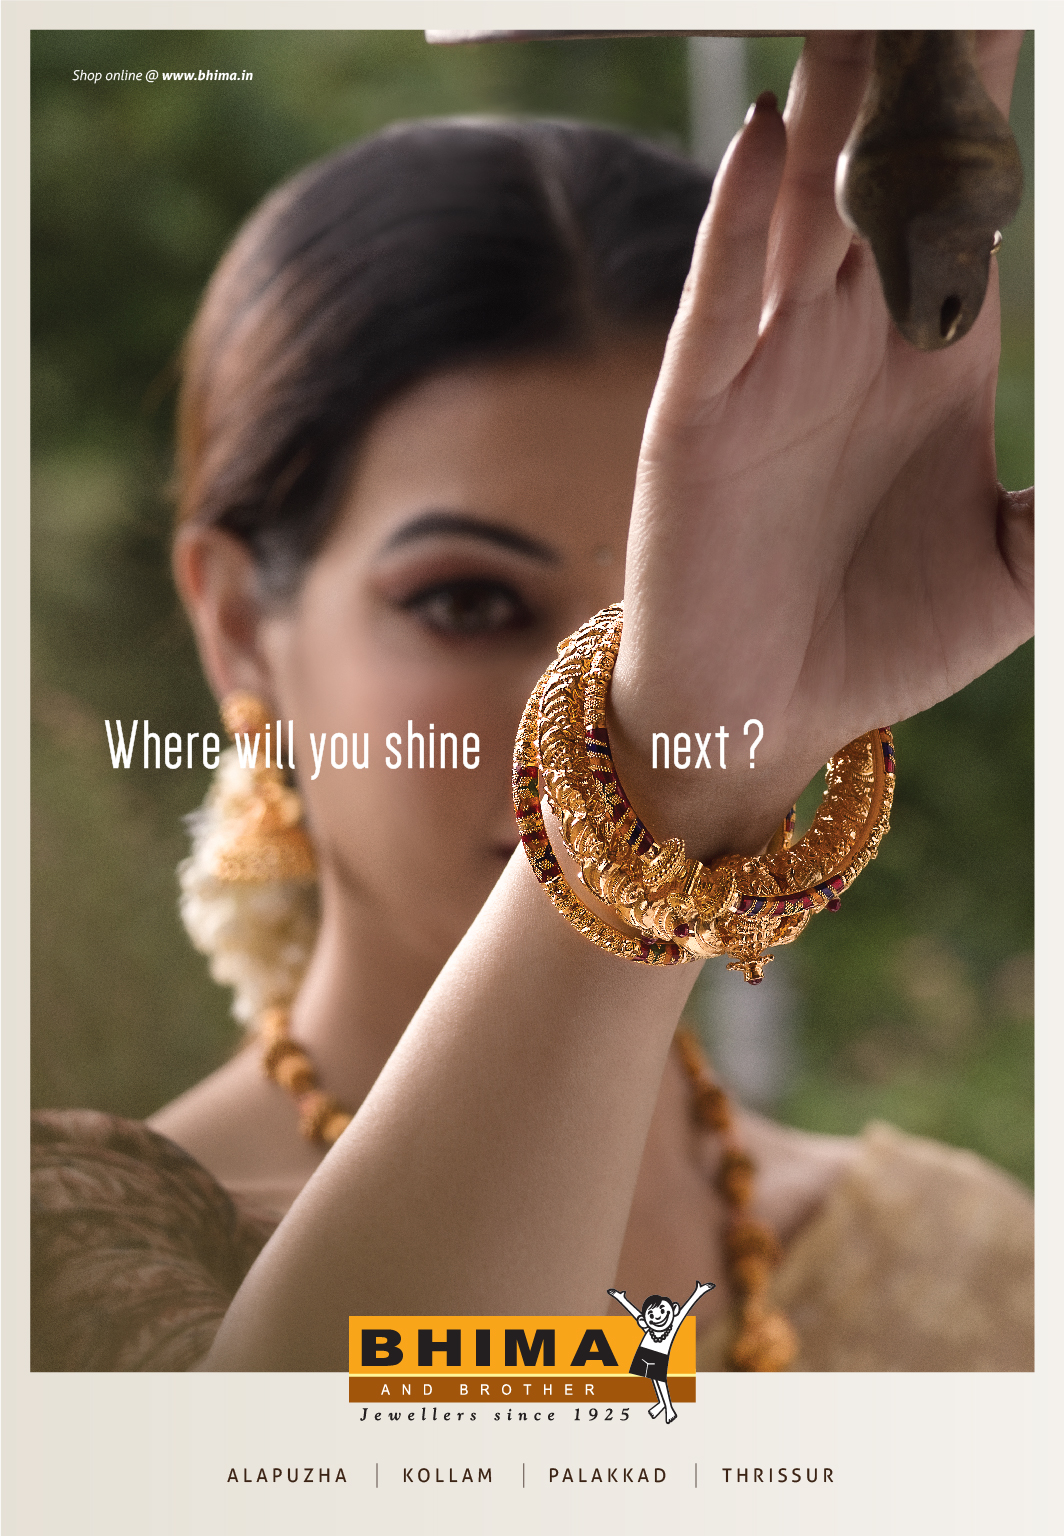 Where will you shine next by Bhima Jewellers | Print mock-up 5 by Stark Communications Pvt Ltd